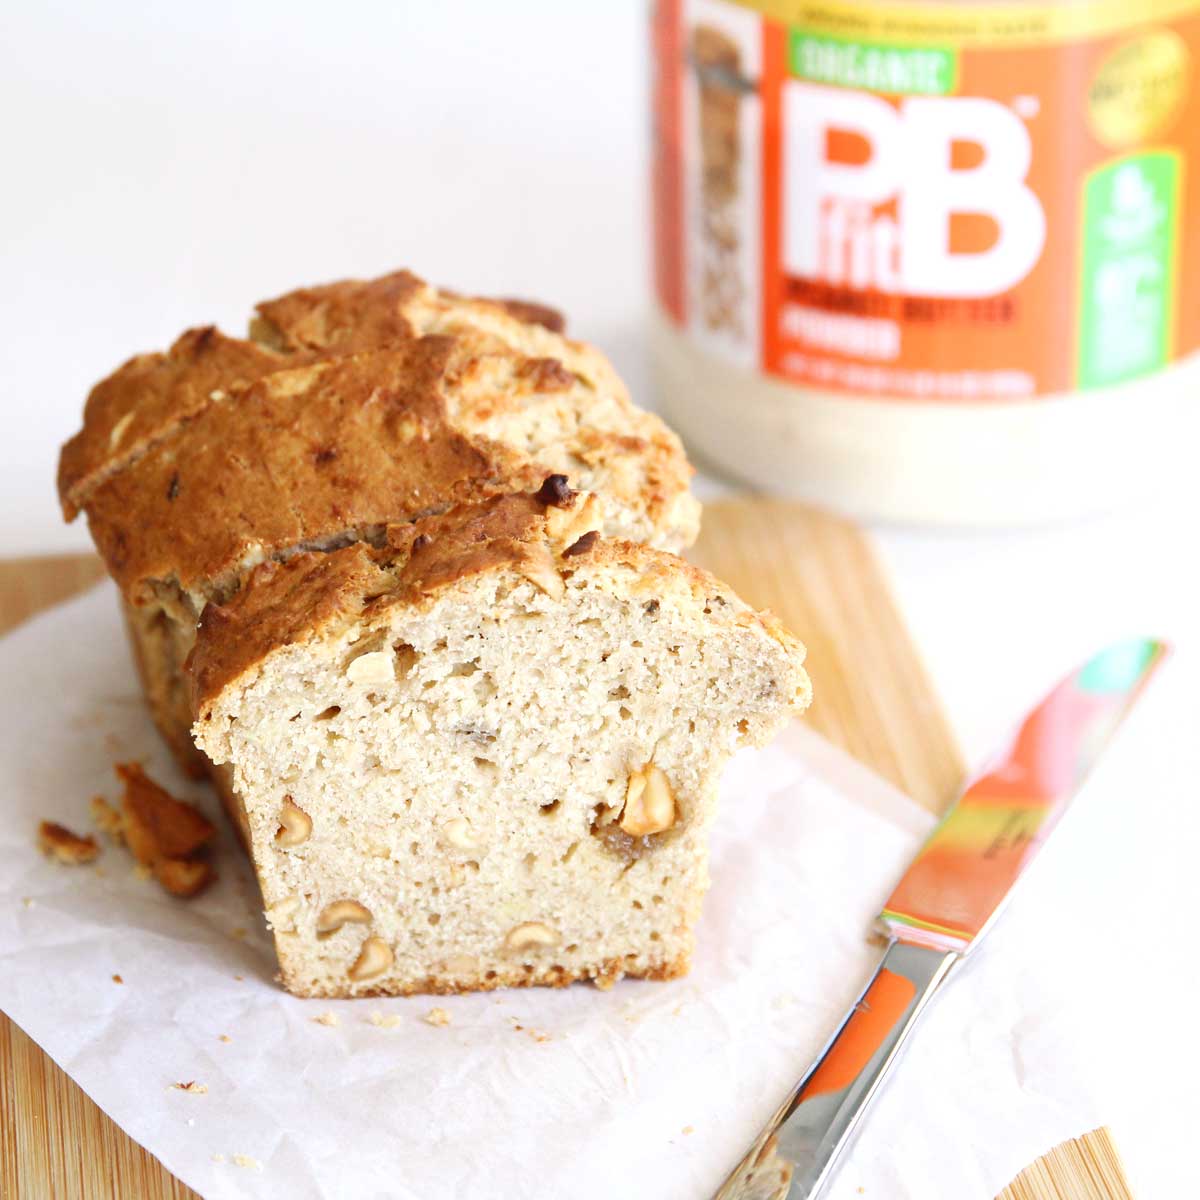 High Protein PB Fit Peanut Butter Banana Bread (Dairy Free, Egg Free Recipe) - Frosting